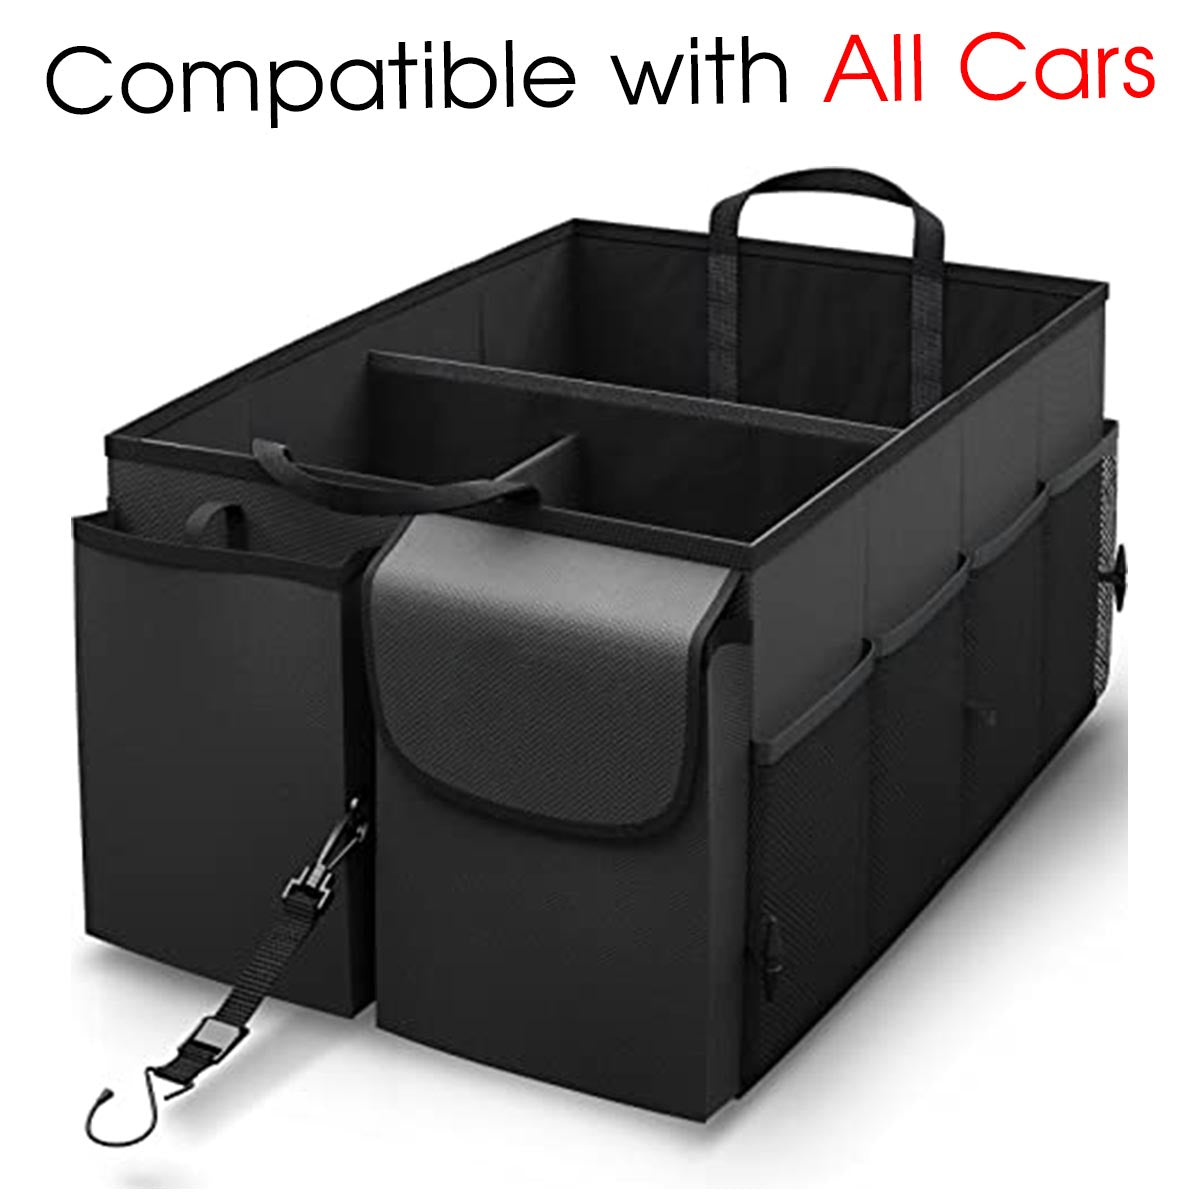 Car Trunk Organizer - Collapsible, Custom fit for All Cars, Multi-Compartment Automotive SUV Car Organizer for Storage w/ Adjustable Straps - Car Accessories for Women and Men CA12993